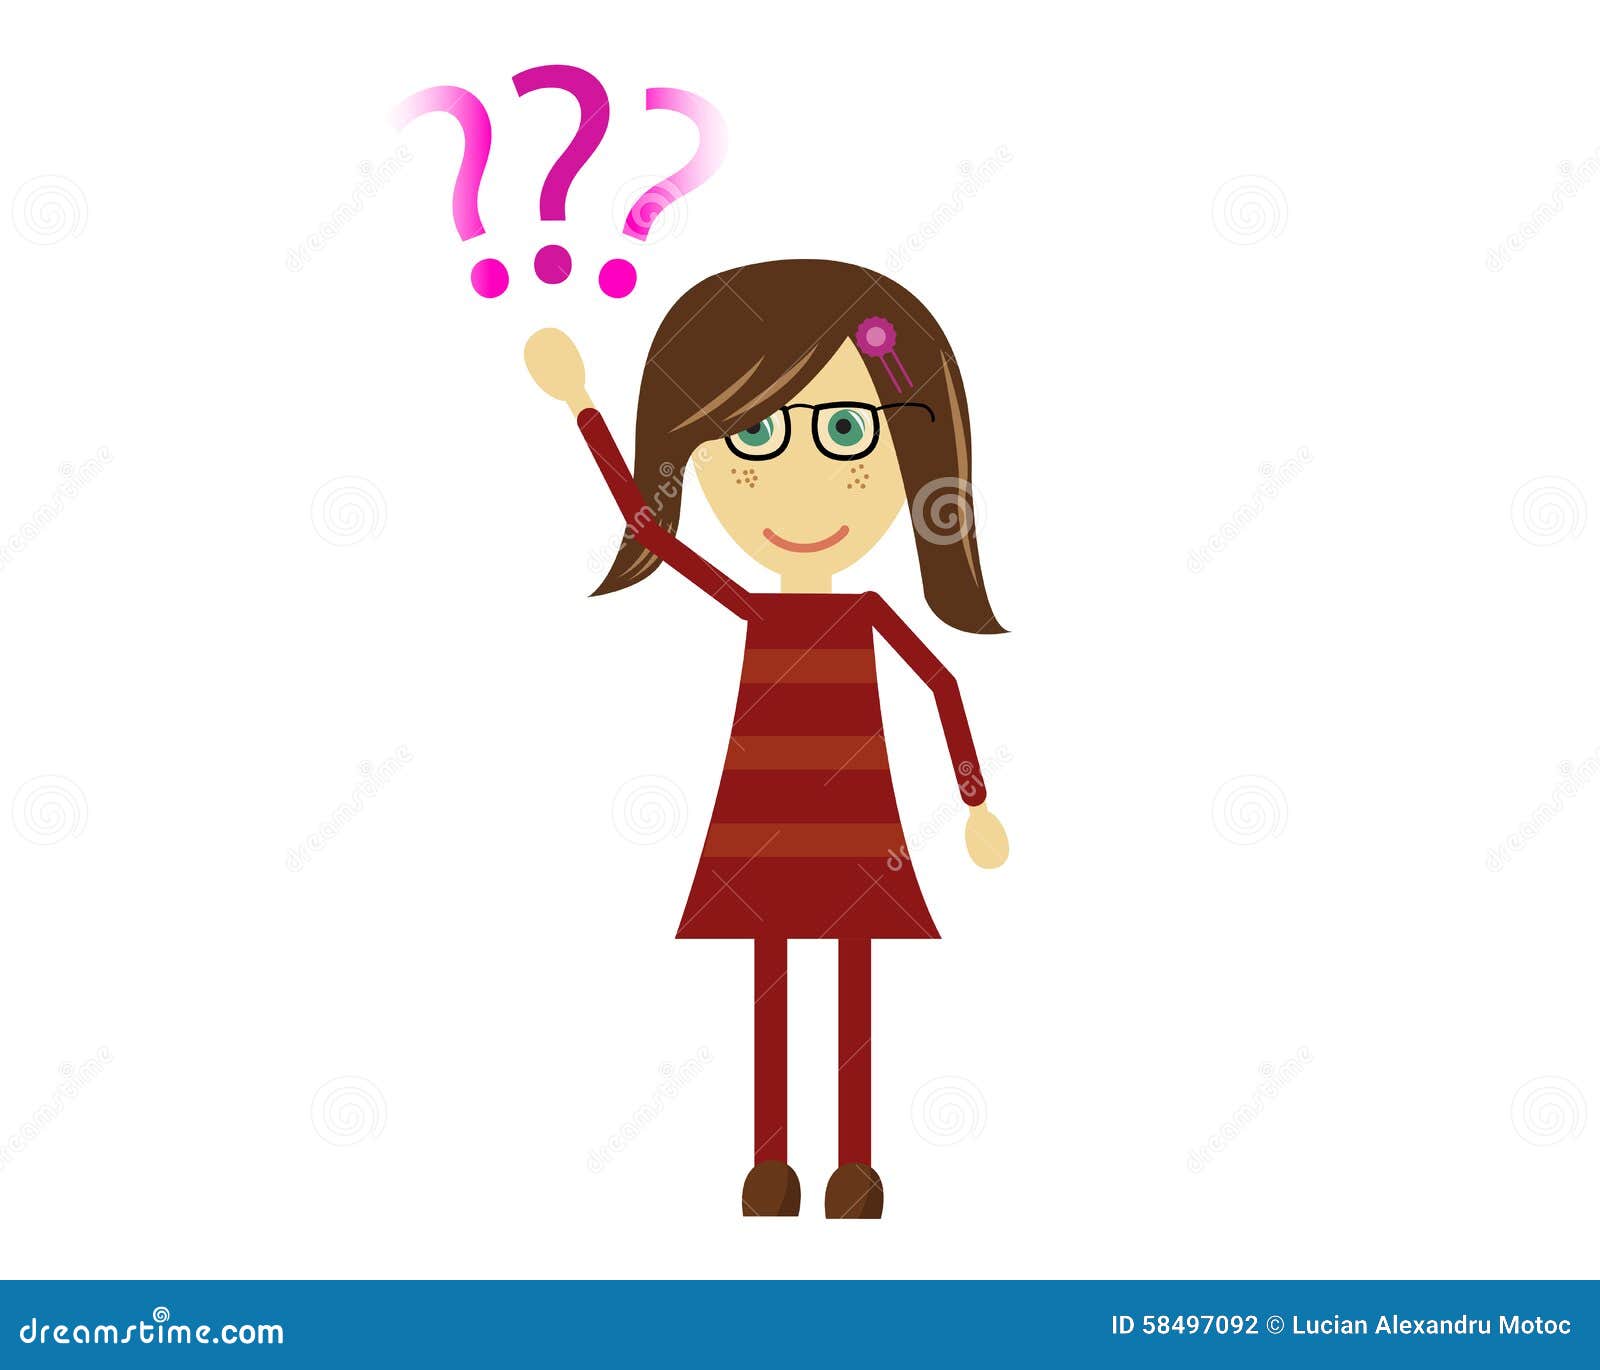 clipart student asking question - photo #47